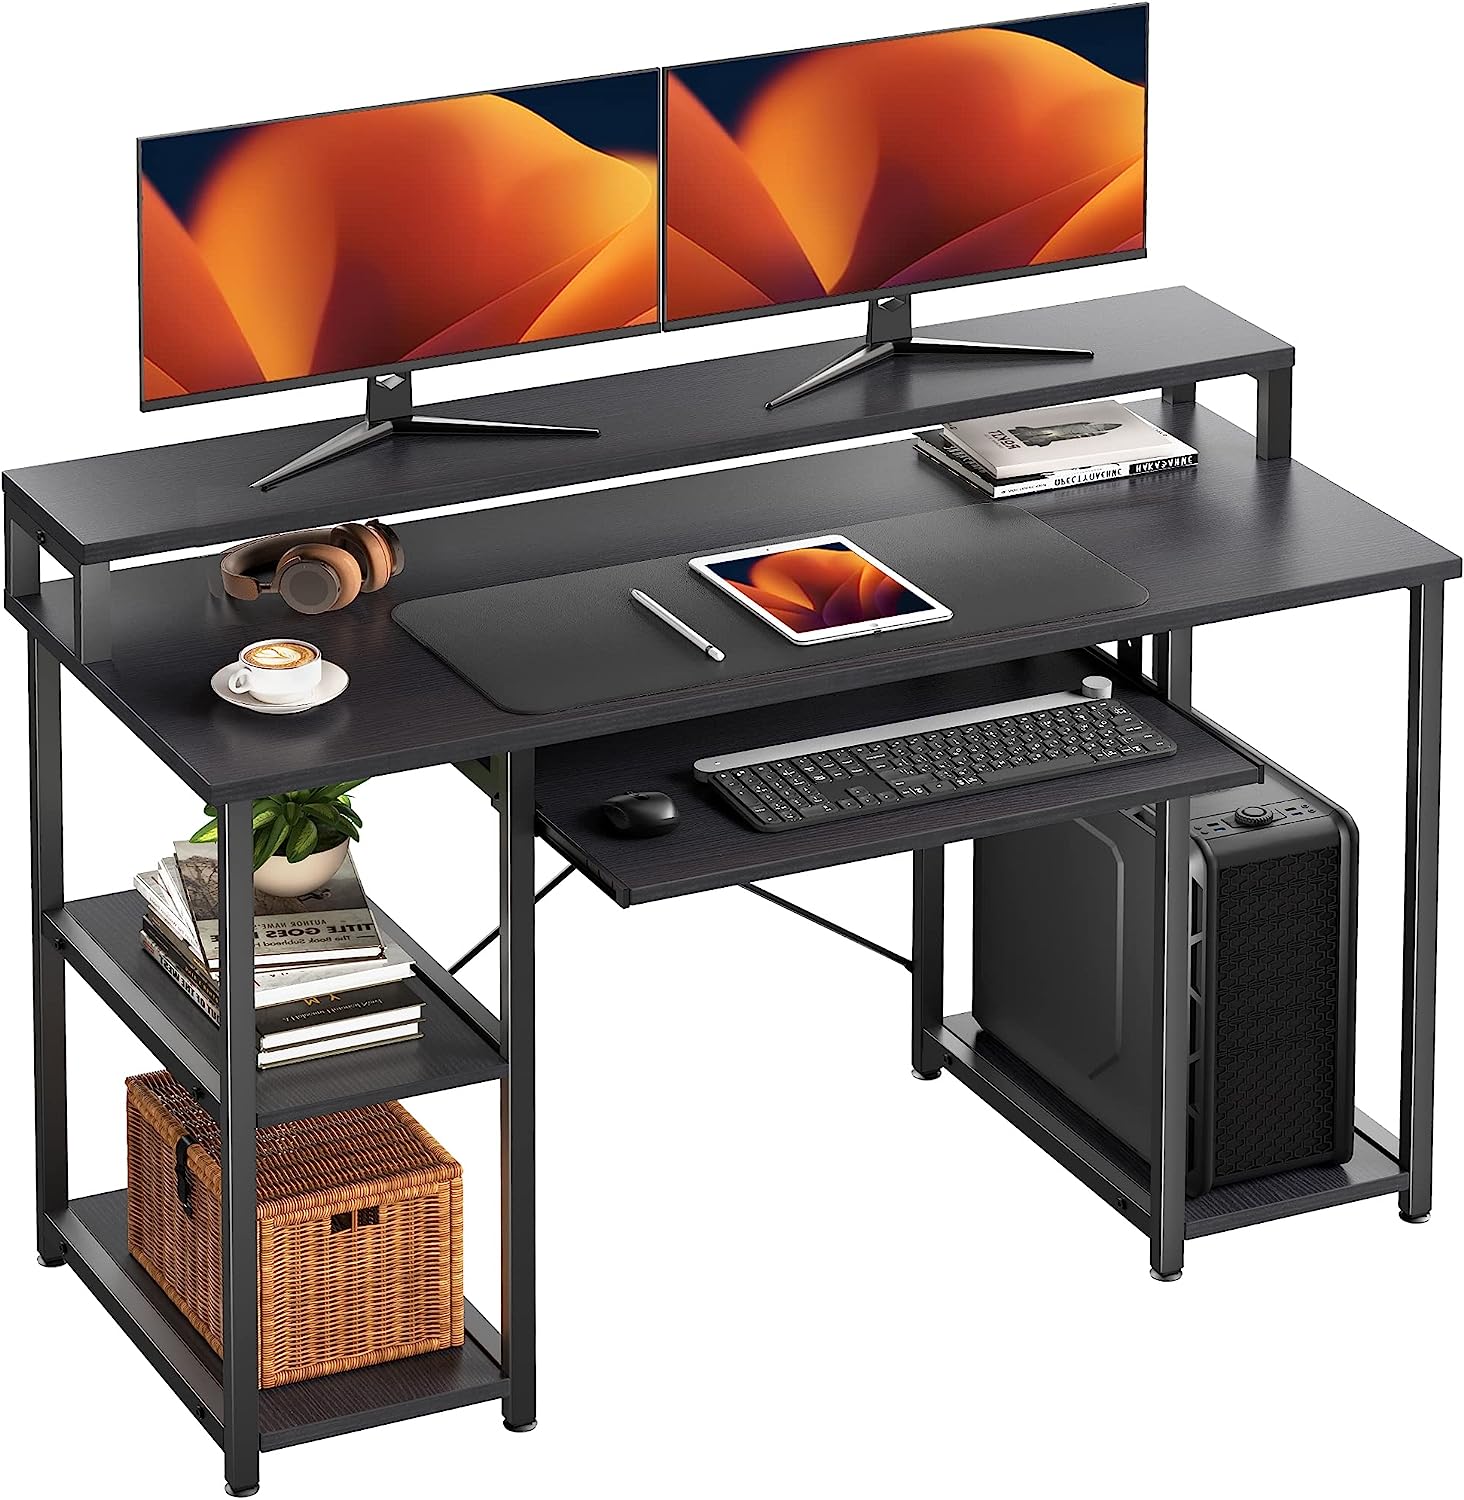 NOBLEWELL Computer Desk with Storage Shelves, 47 inch [...]